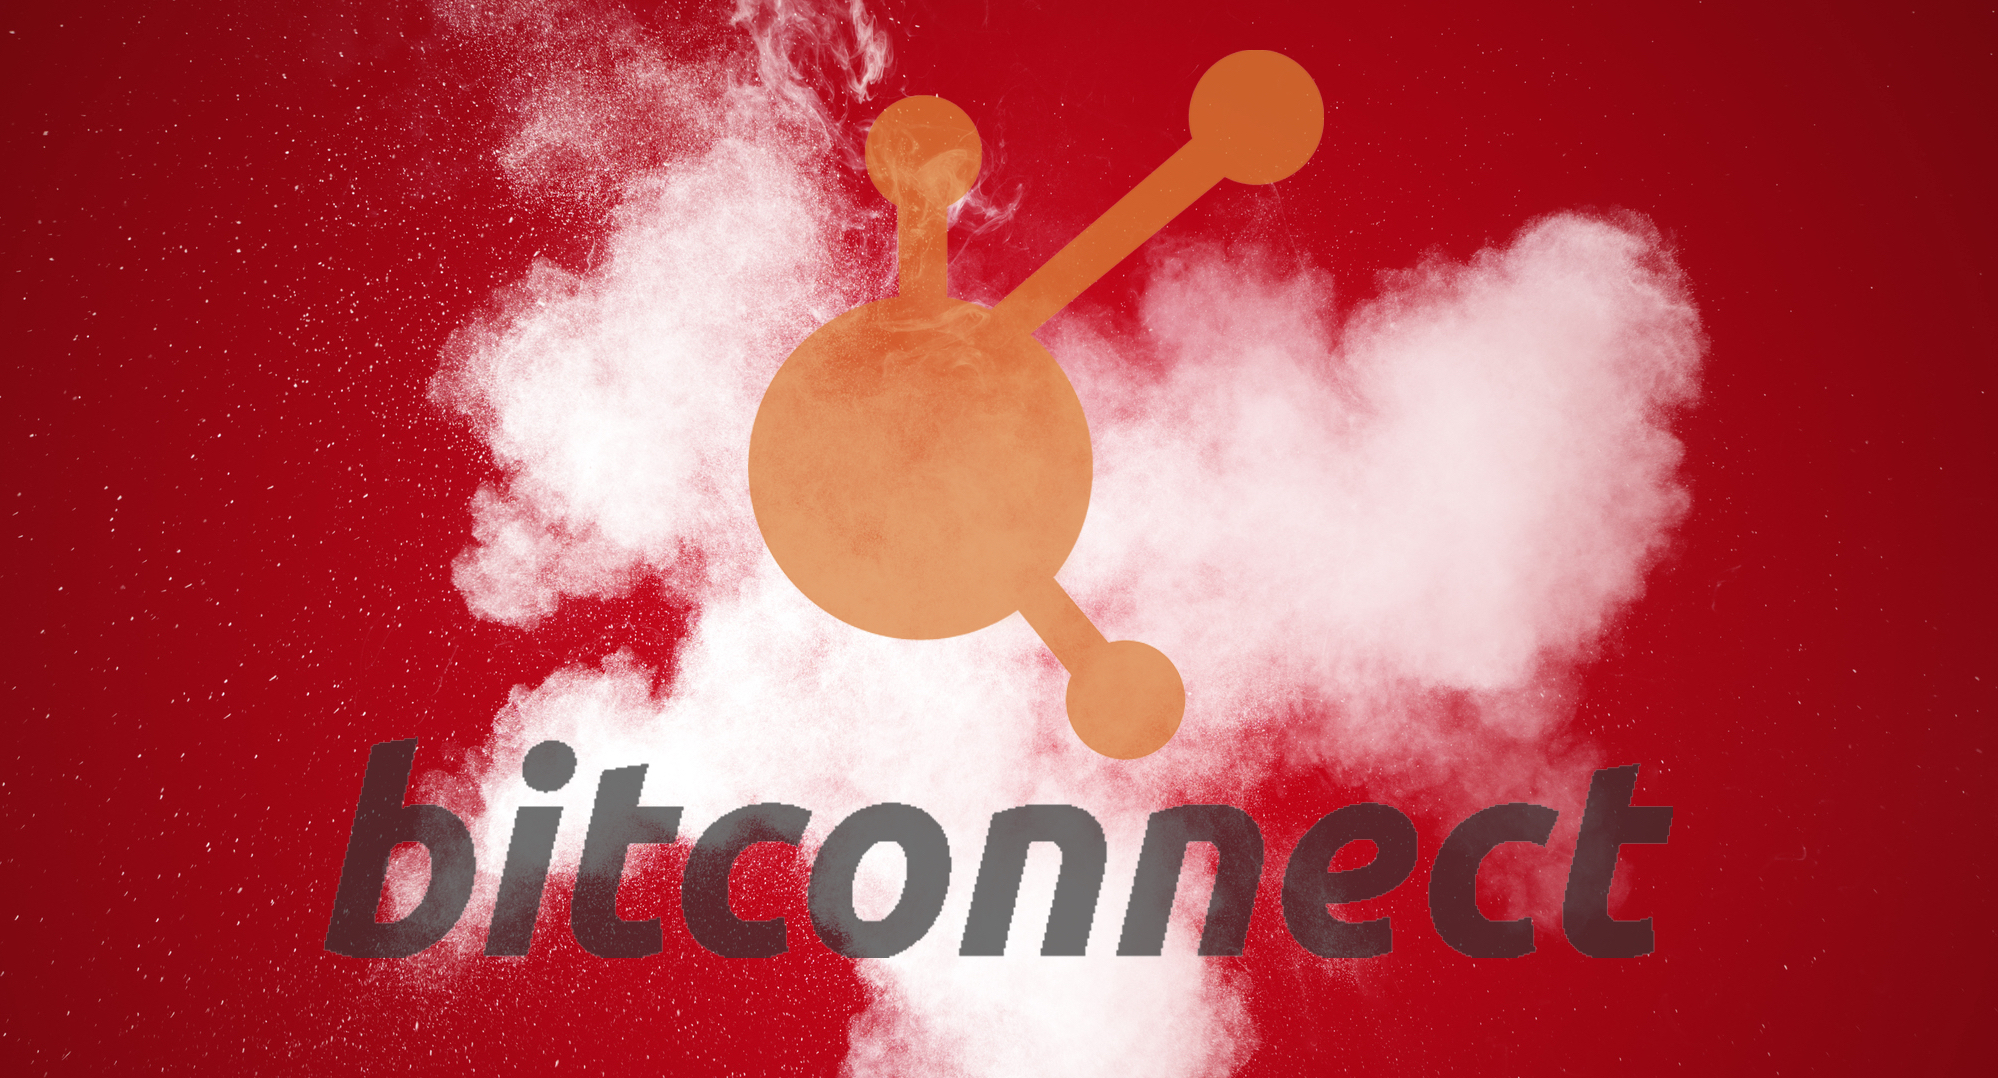 photo of Bitconnect, which has been accused of running a Ponzi scheme, shuts down image